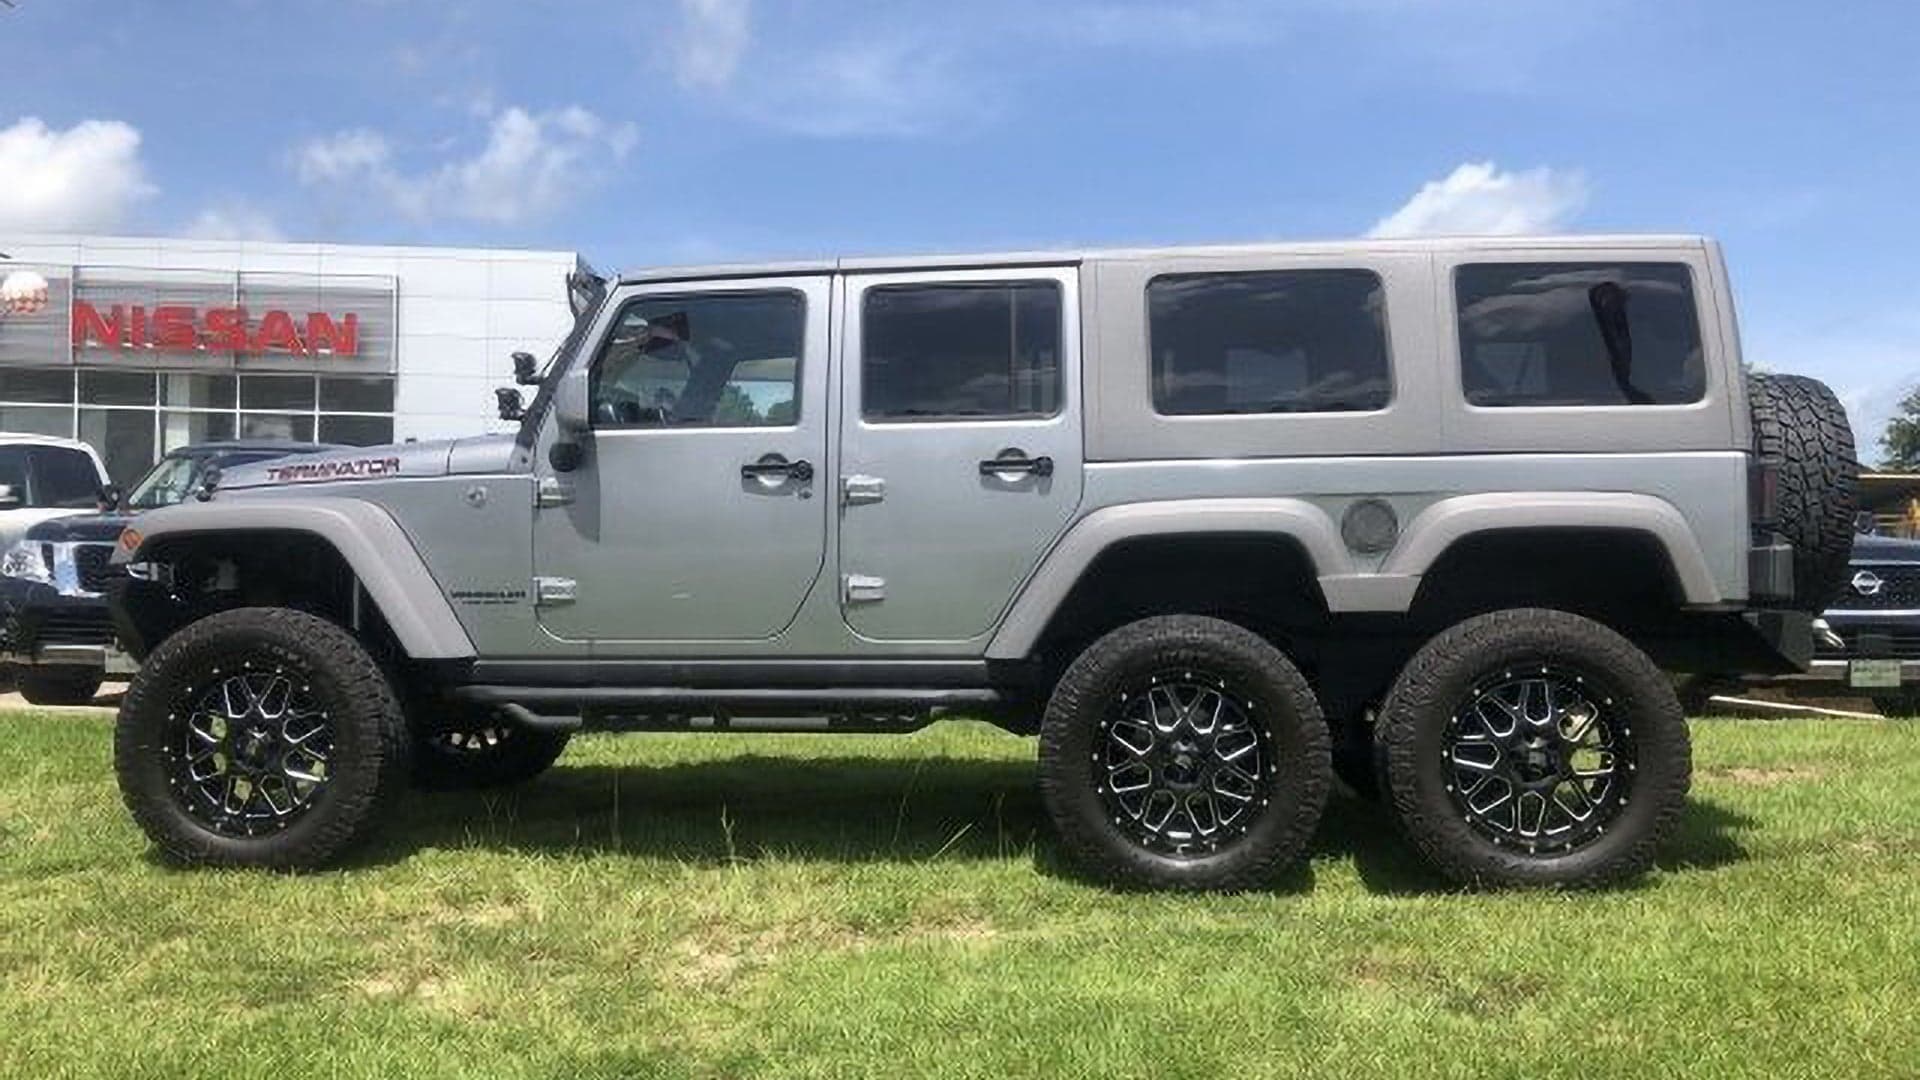 This Jeep Wrangler 6×6 ‘Terminator’ With Questionable Mods Can Be Yours for $74,955